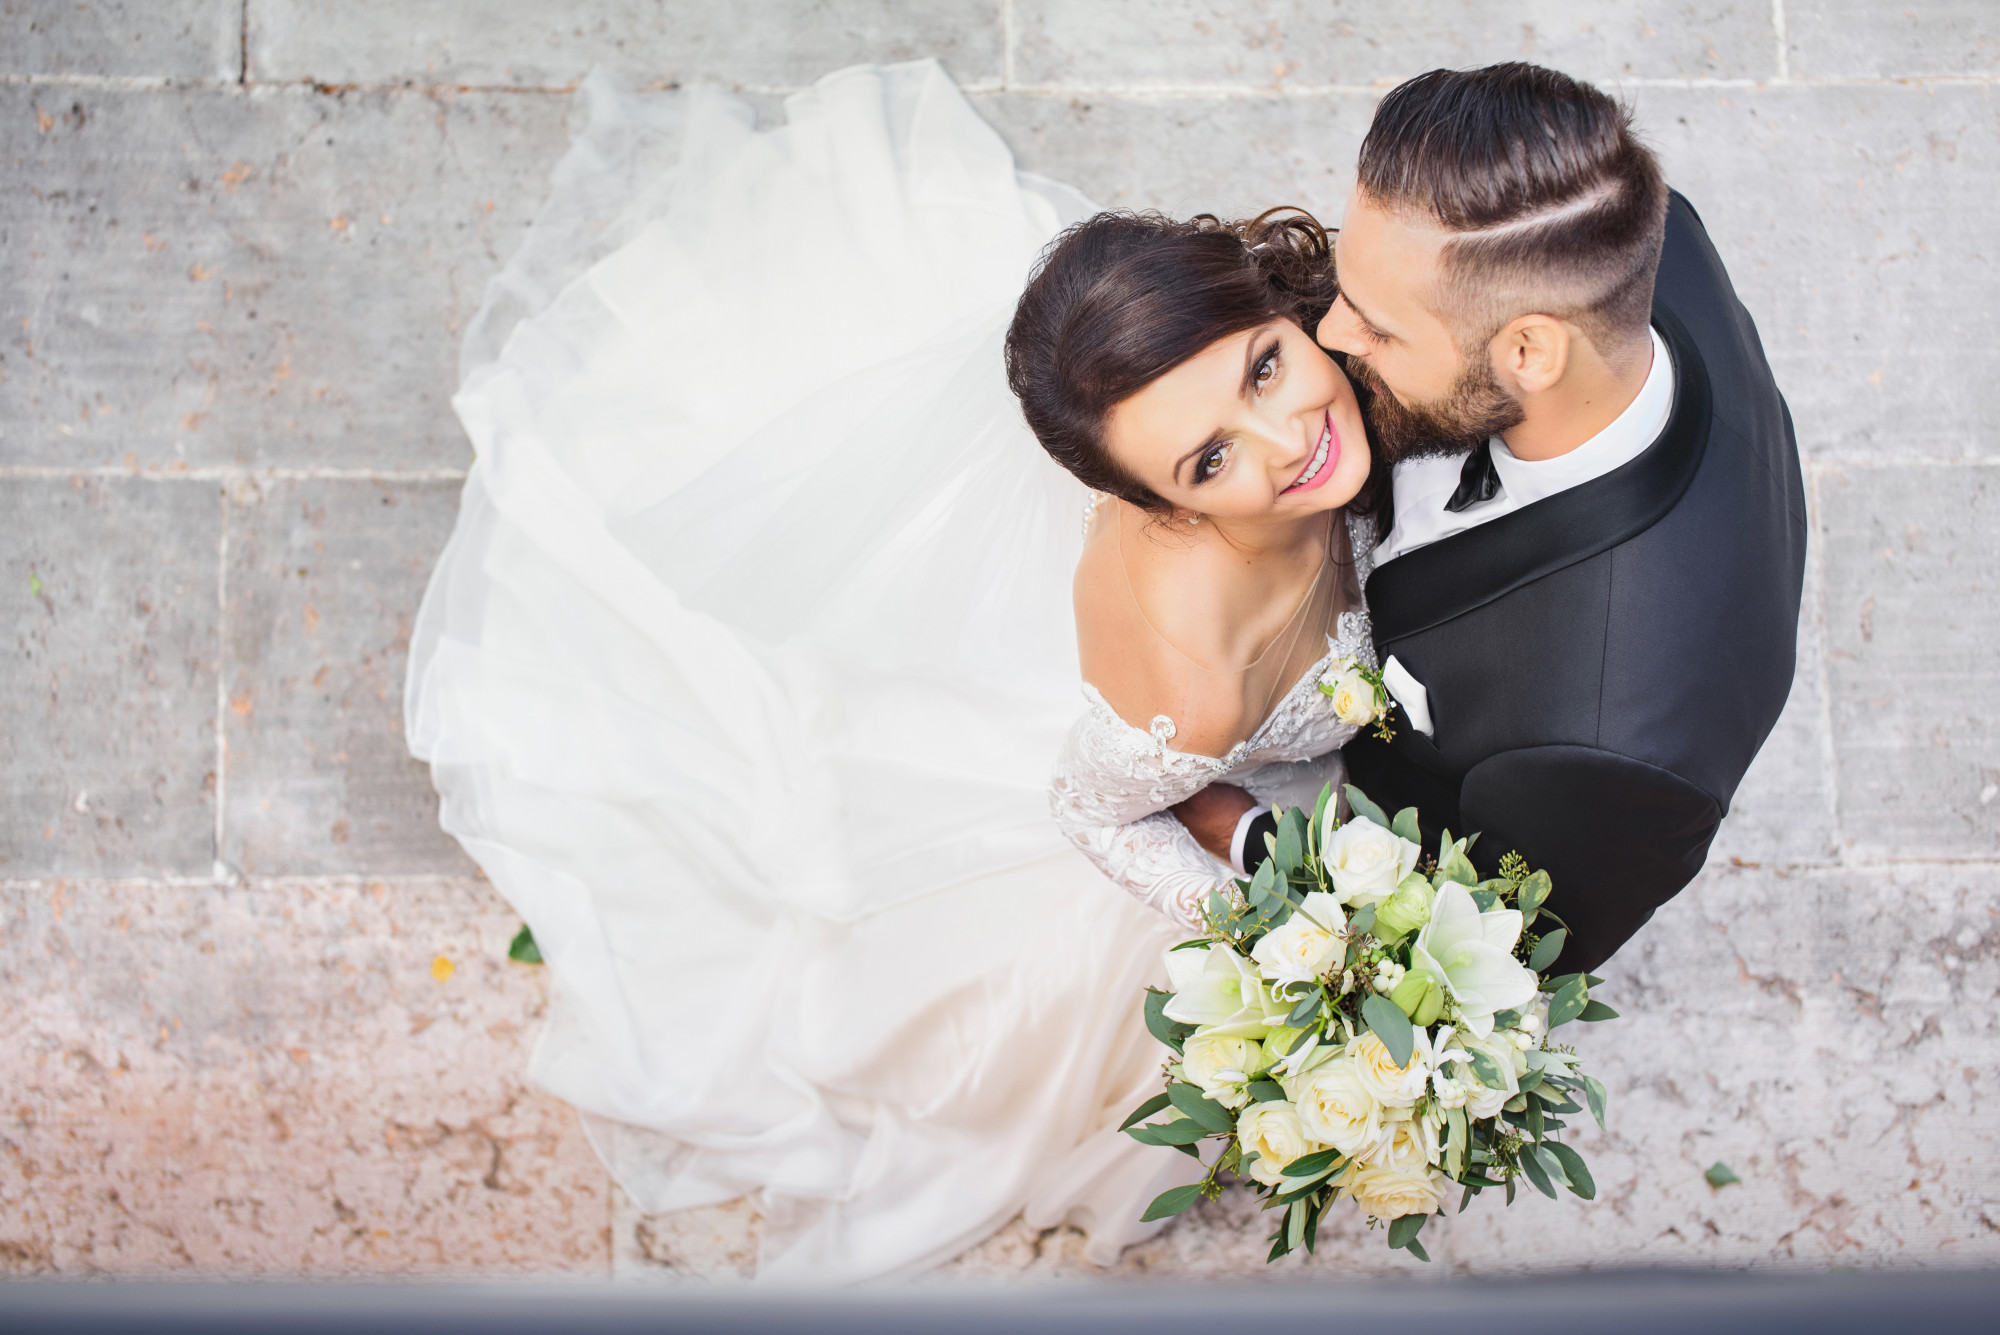 Planning a wedding isn't always easy, but with a few tips and tricks you can master the process. Here are 5 wedding planning tips you need to know.